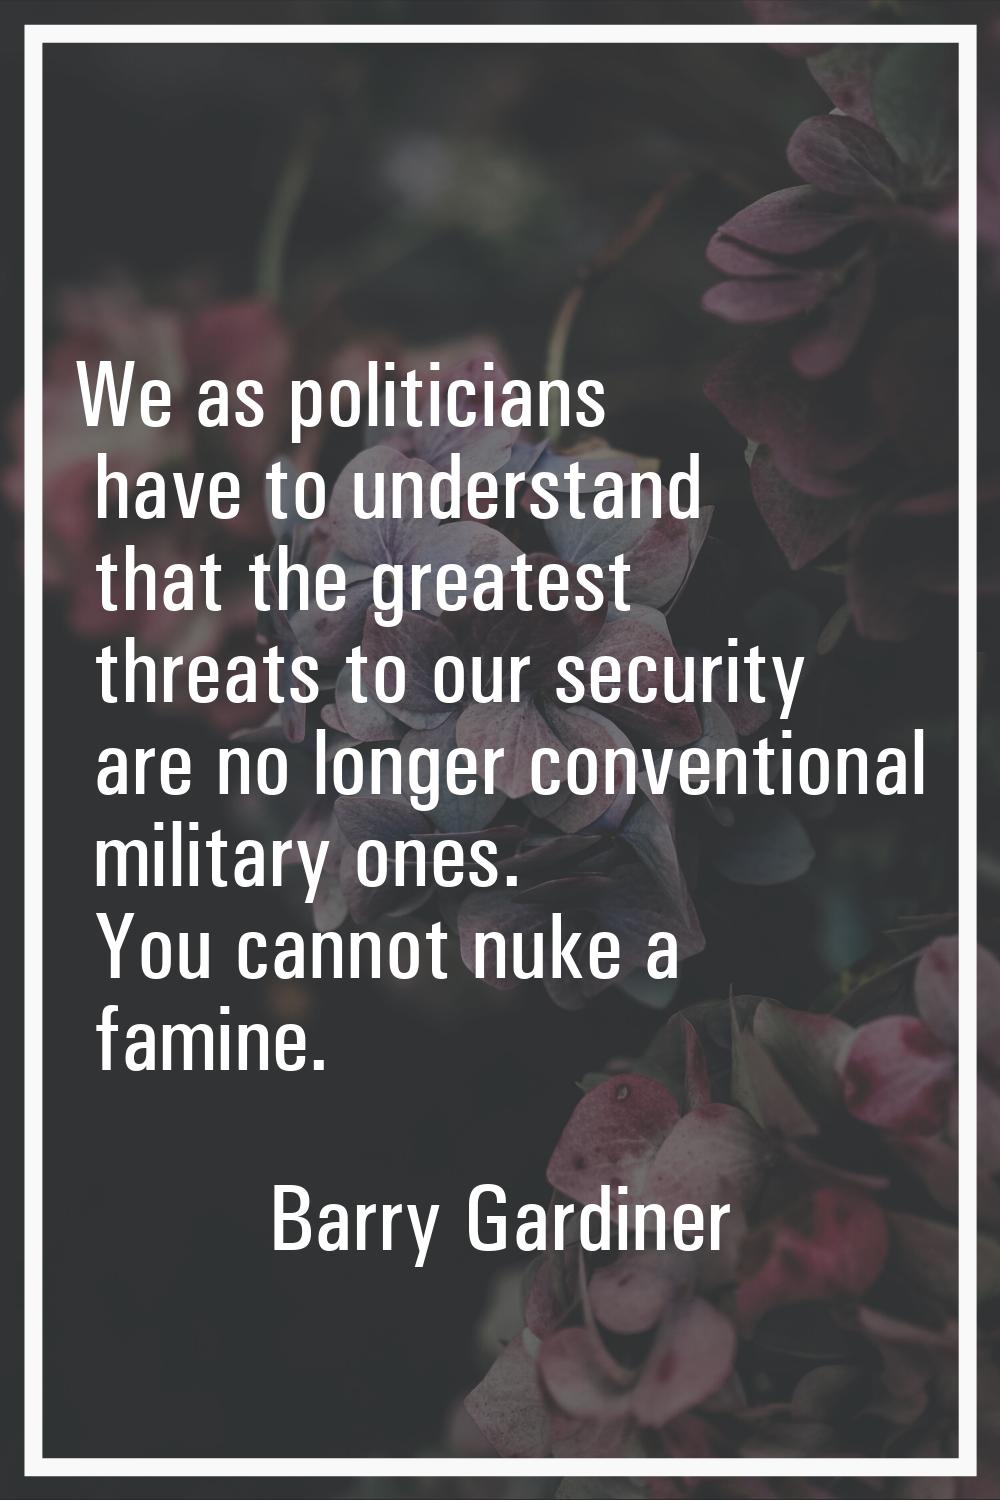 We as politicians have to understand that the greatest threats to our security are no longer conven